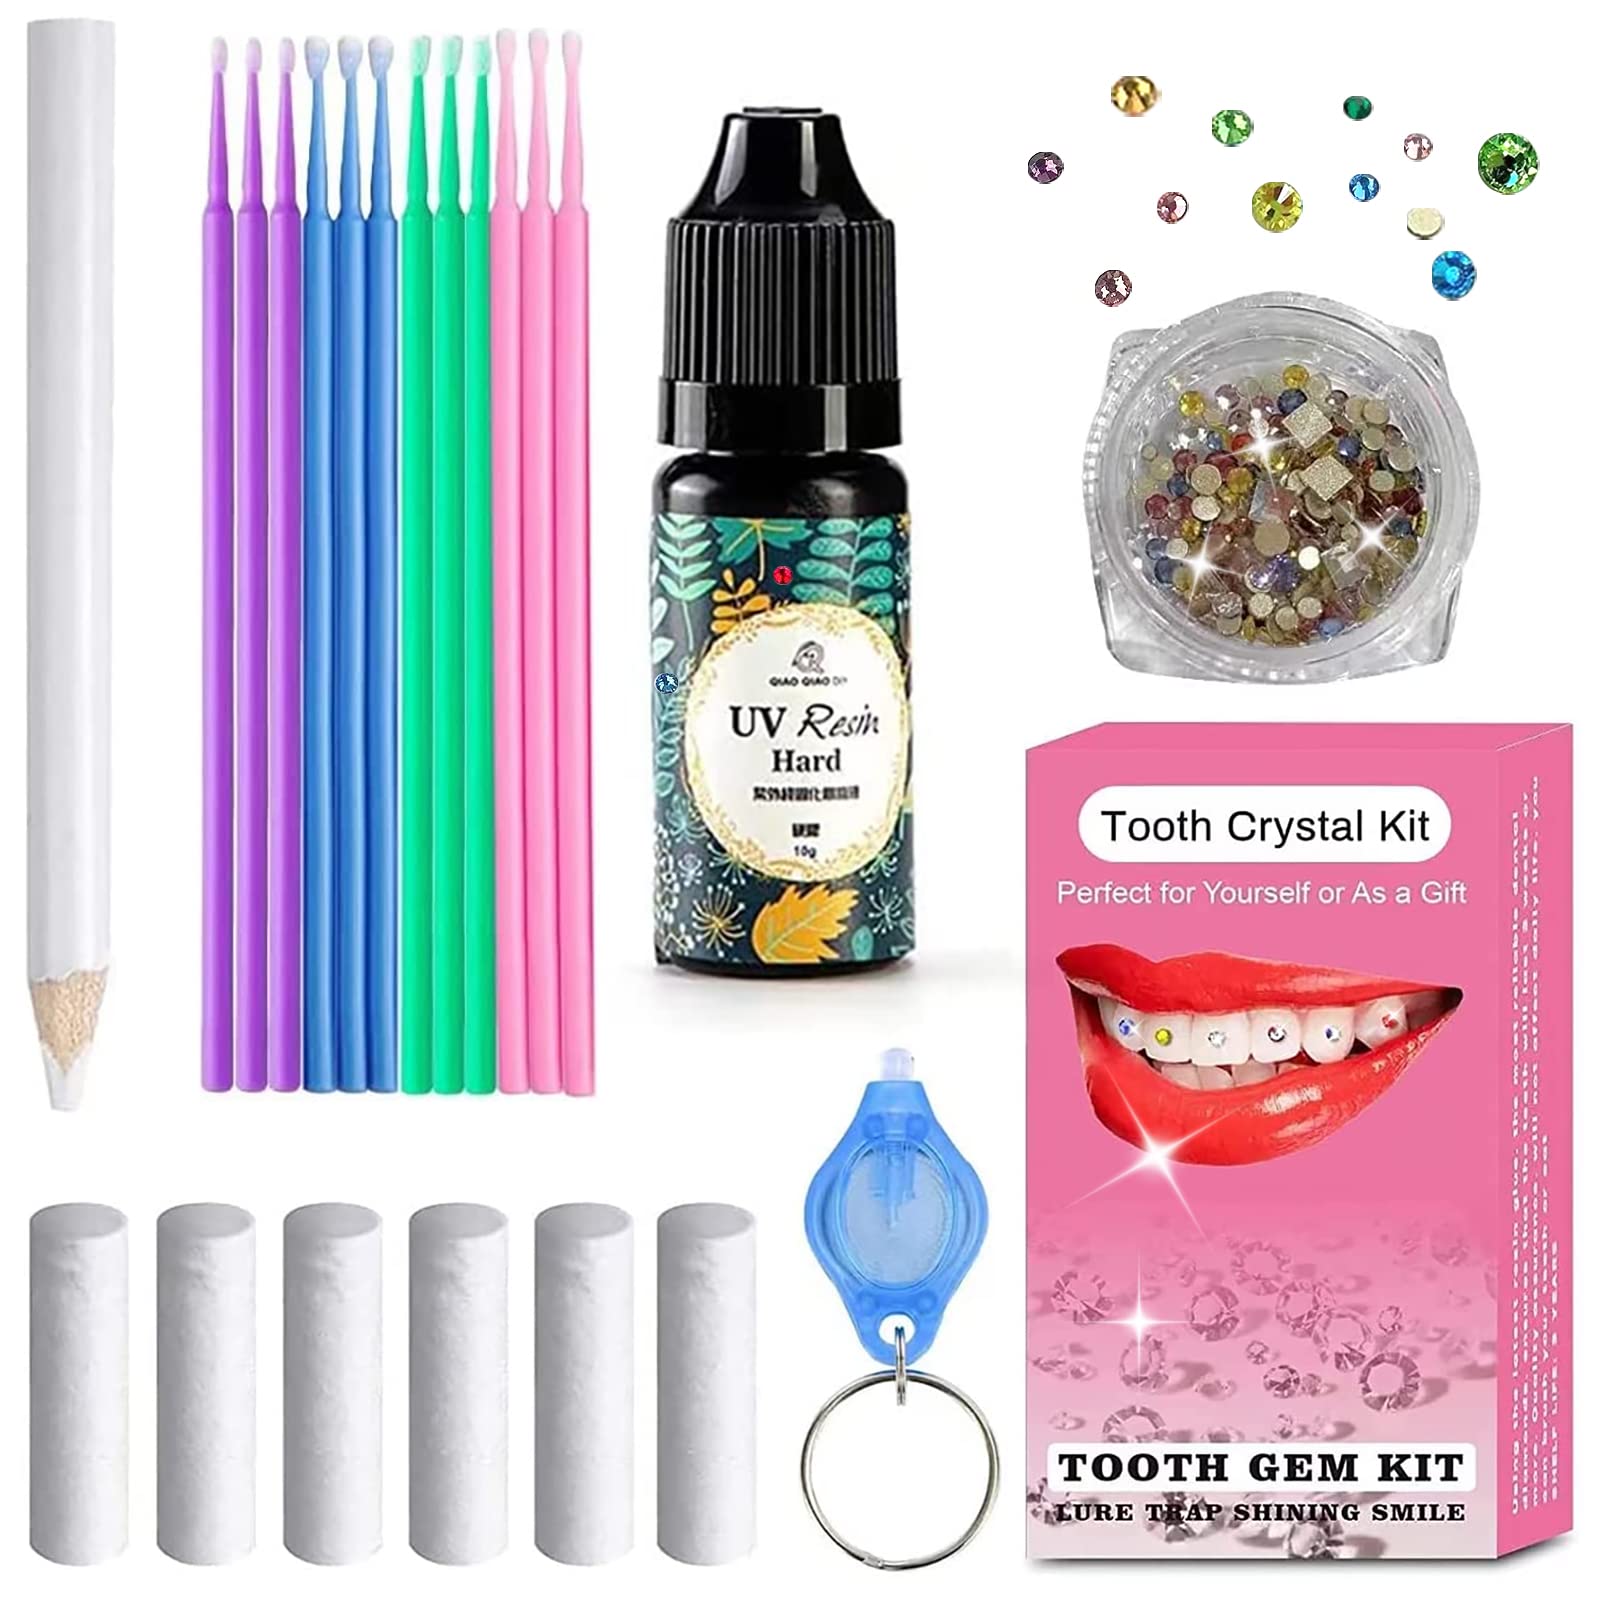 Lingouzi Tooth Gem Kit- DIY Tooth Crystal Set with 20 Pieces Crystals UV  Light Gems Picker 0 ml Glue- Shining Smile Striking Trap- Great Tooth  Jewelry Gems Kit for DIY Use 